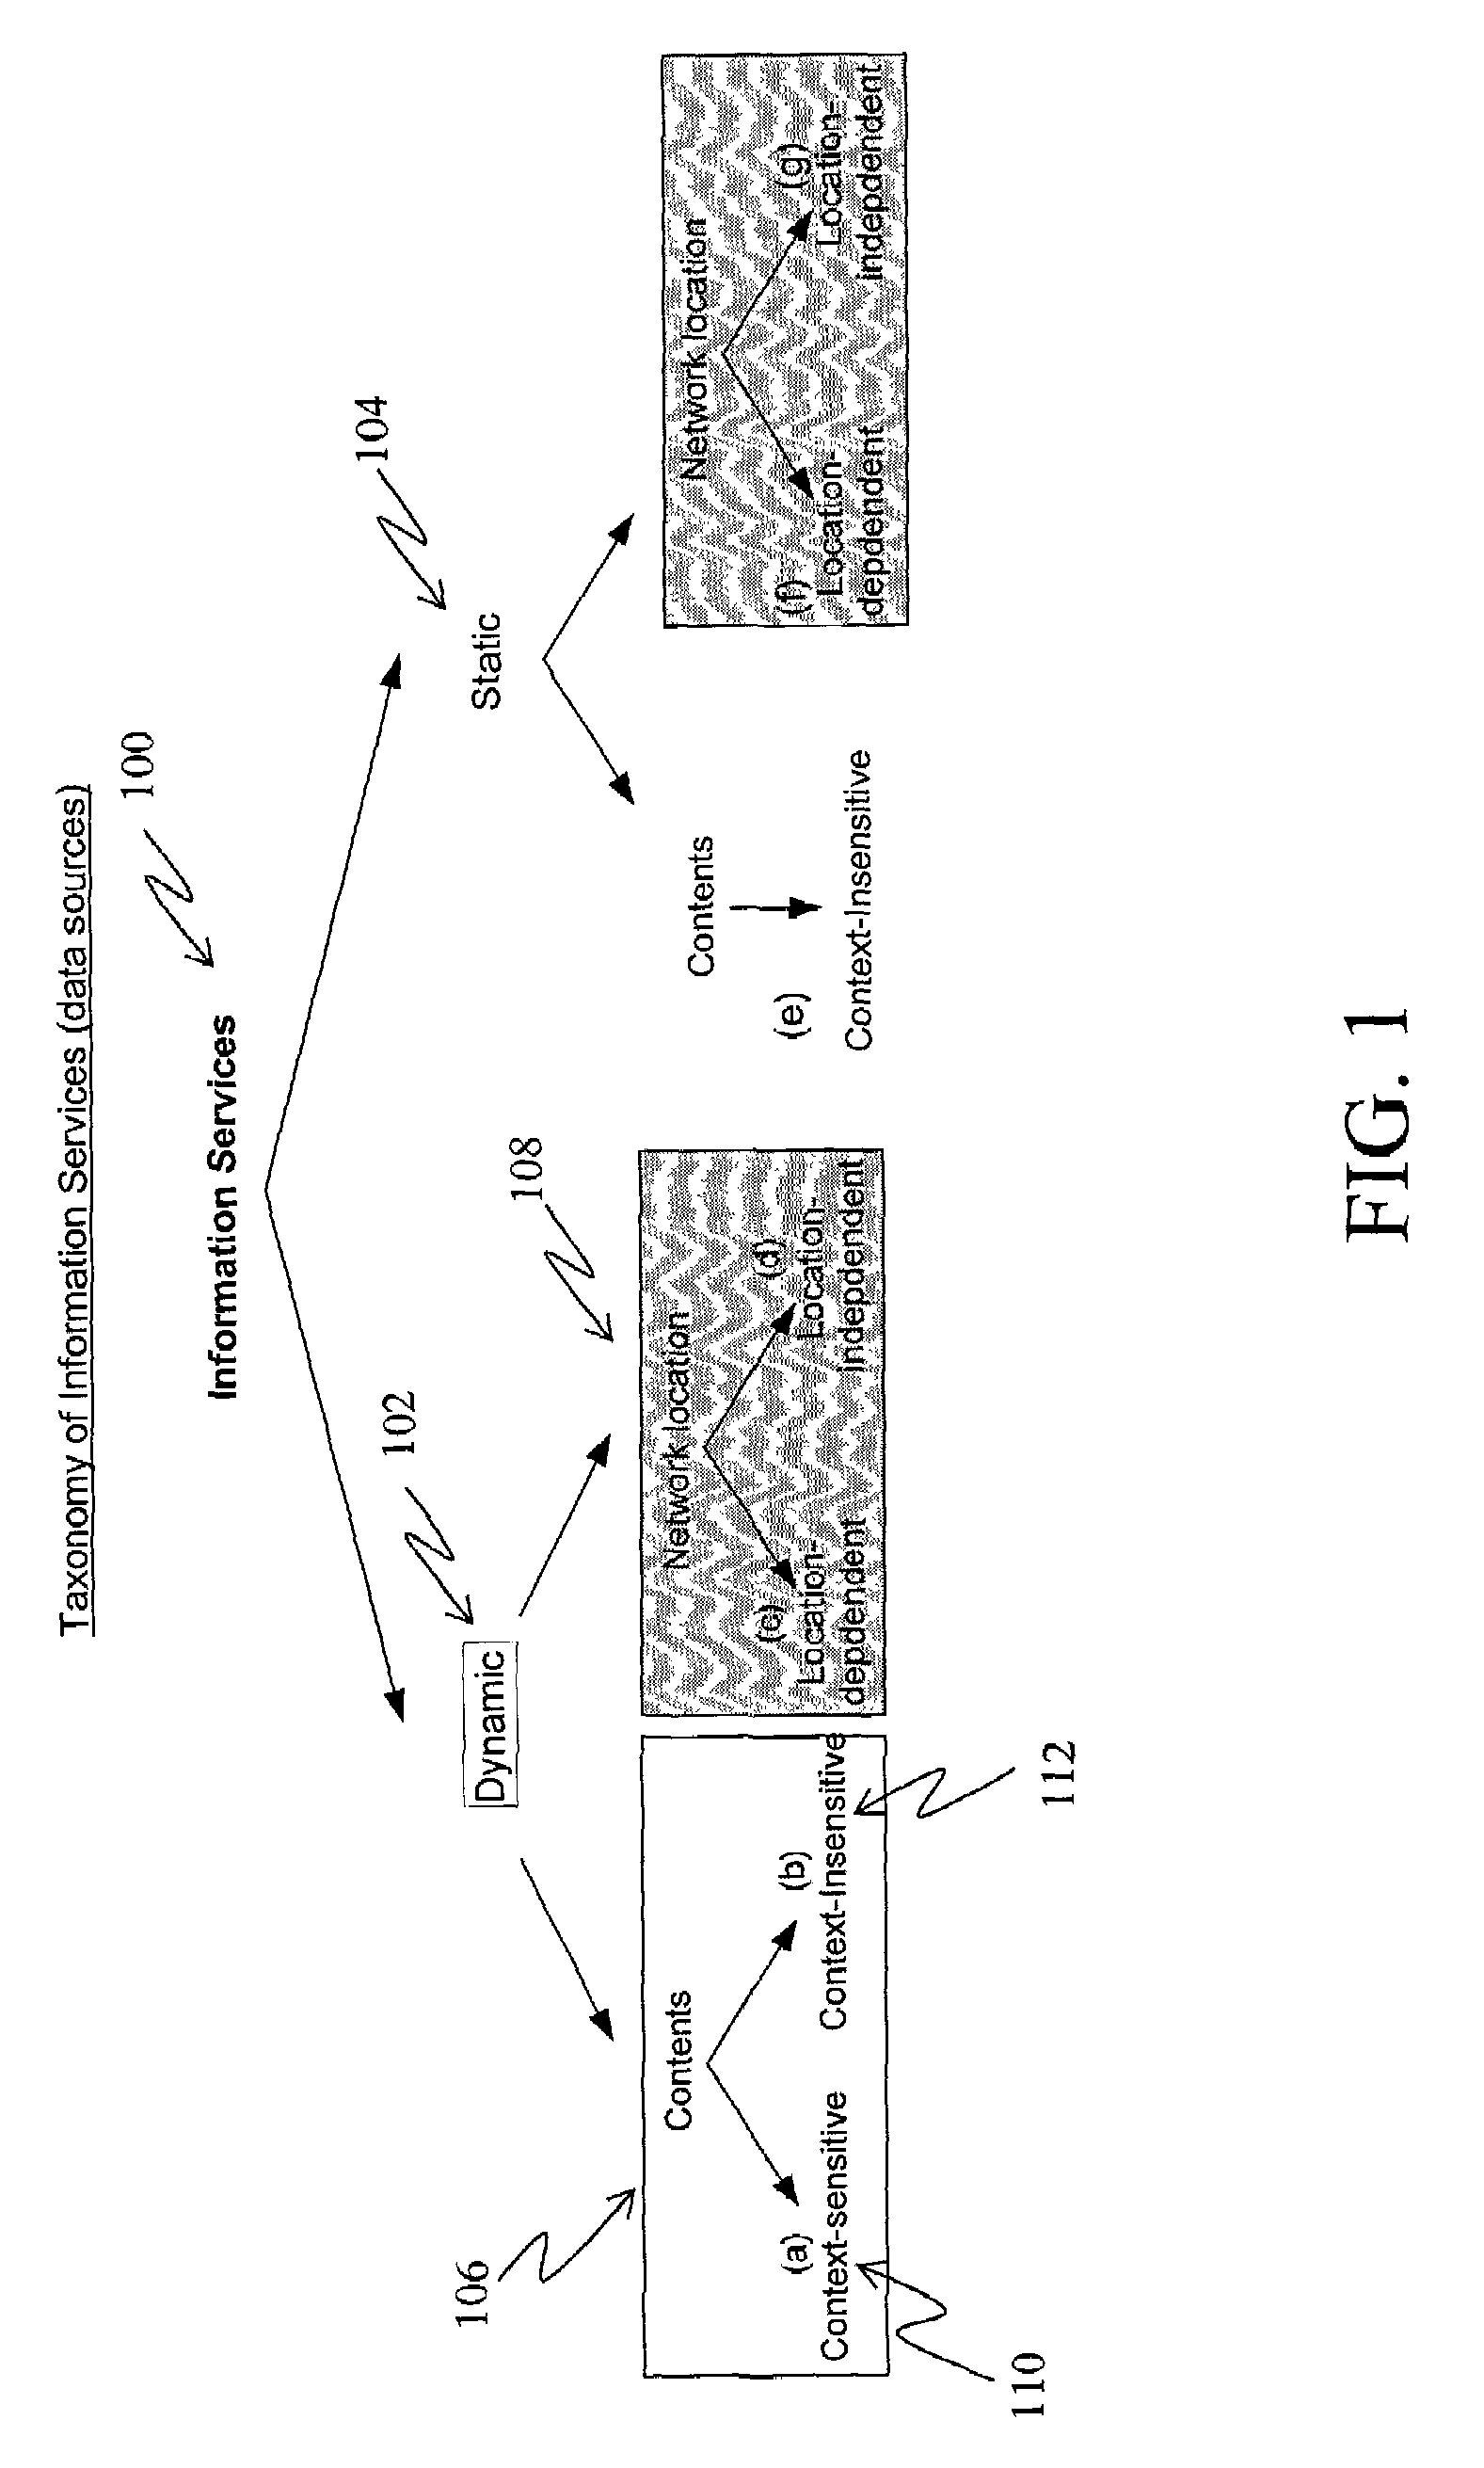 Apparatus and method for context-sensitive dynamic information service composition via mobile and wireless network communication